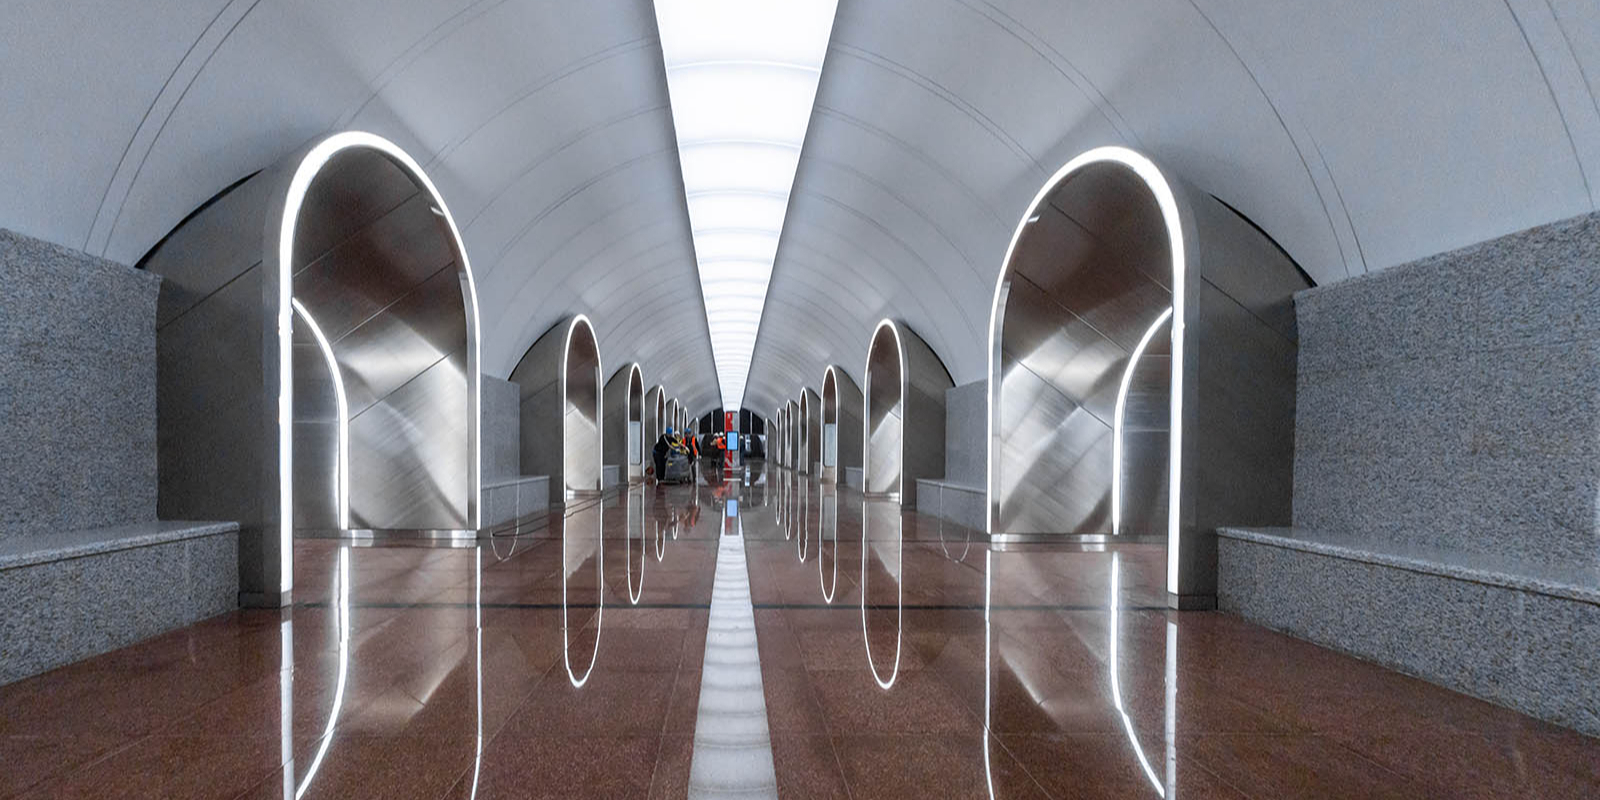 Soon the launch of the station Rizhskaya BKL. Now she looks like this - Moscow Metro, Moscow, Longpost, Bcl